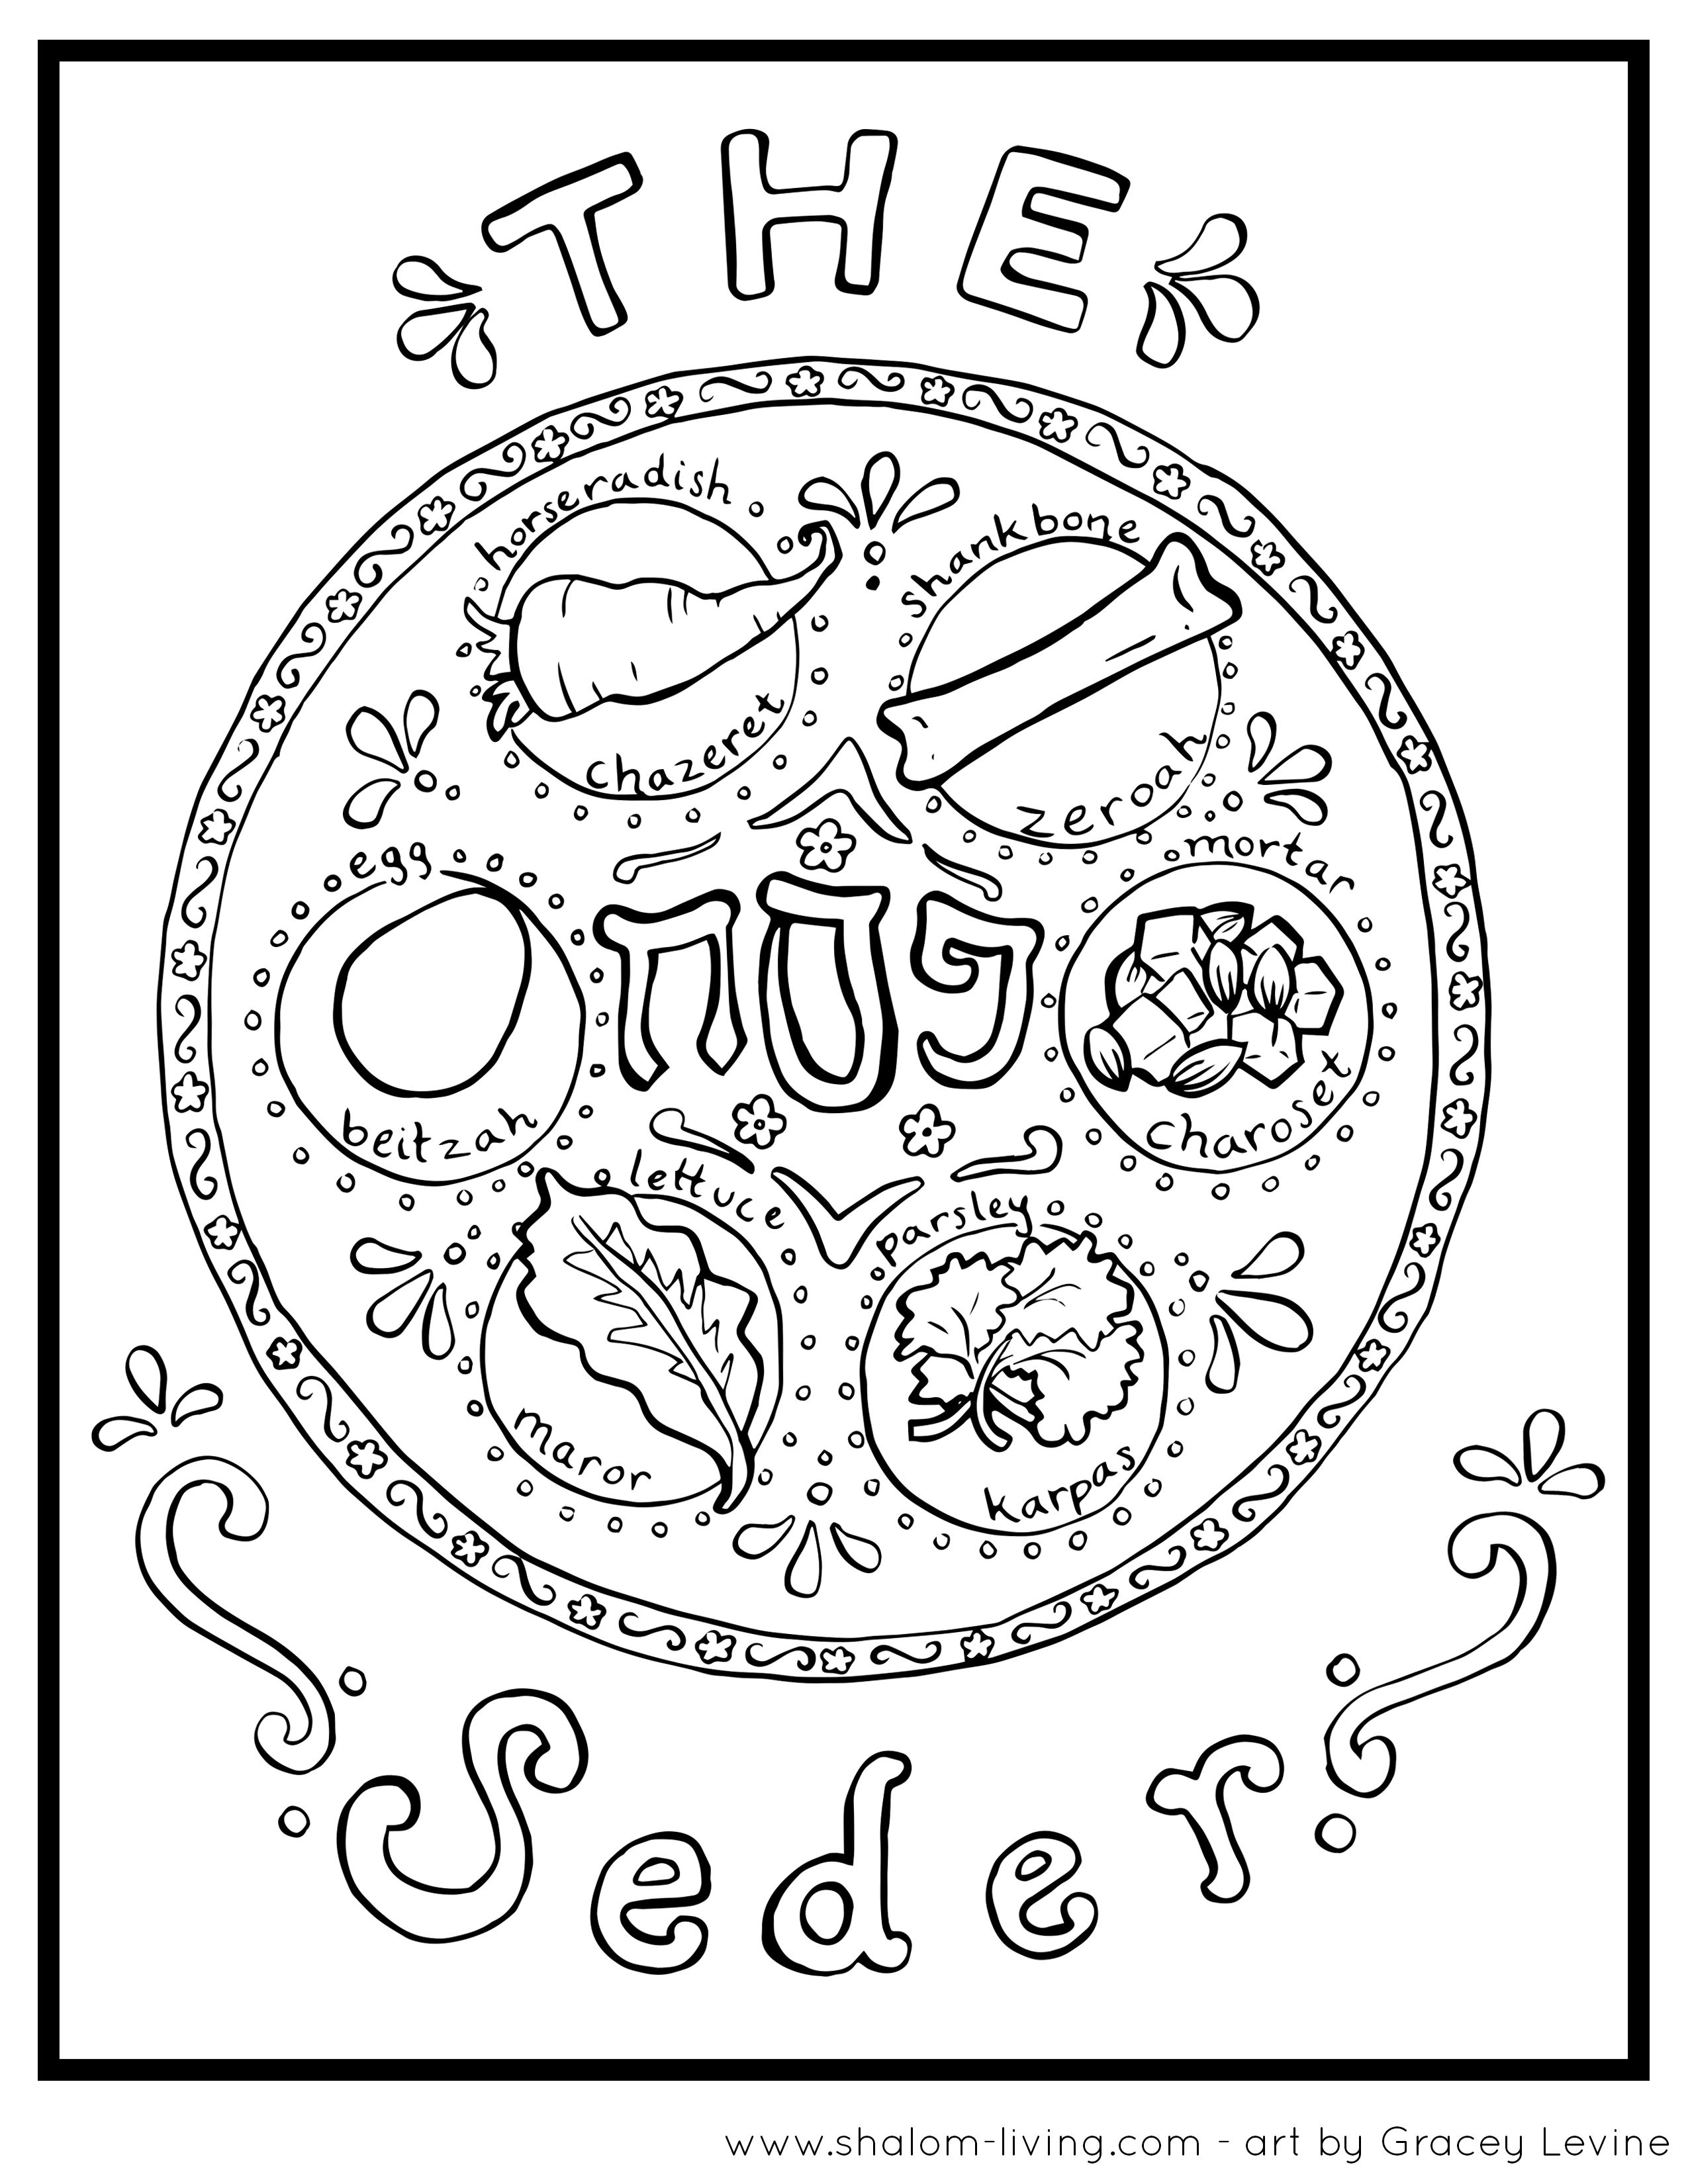 Free Passover Coloring Pages At Shalom Living! | Passover | Passover - Free Printable Messianic Haggadah